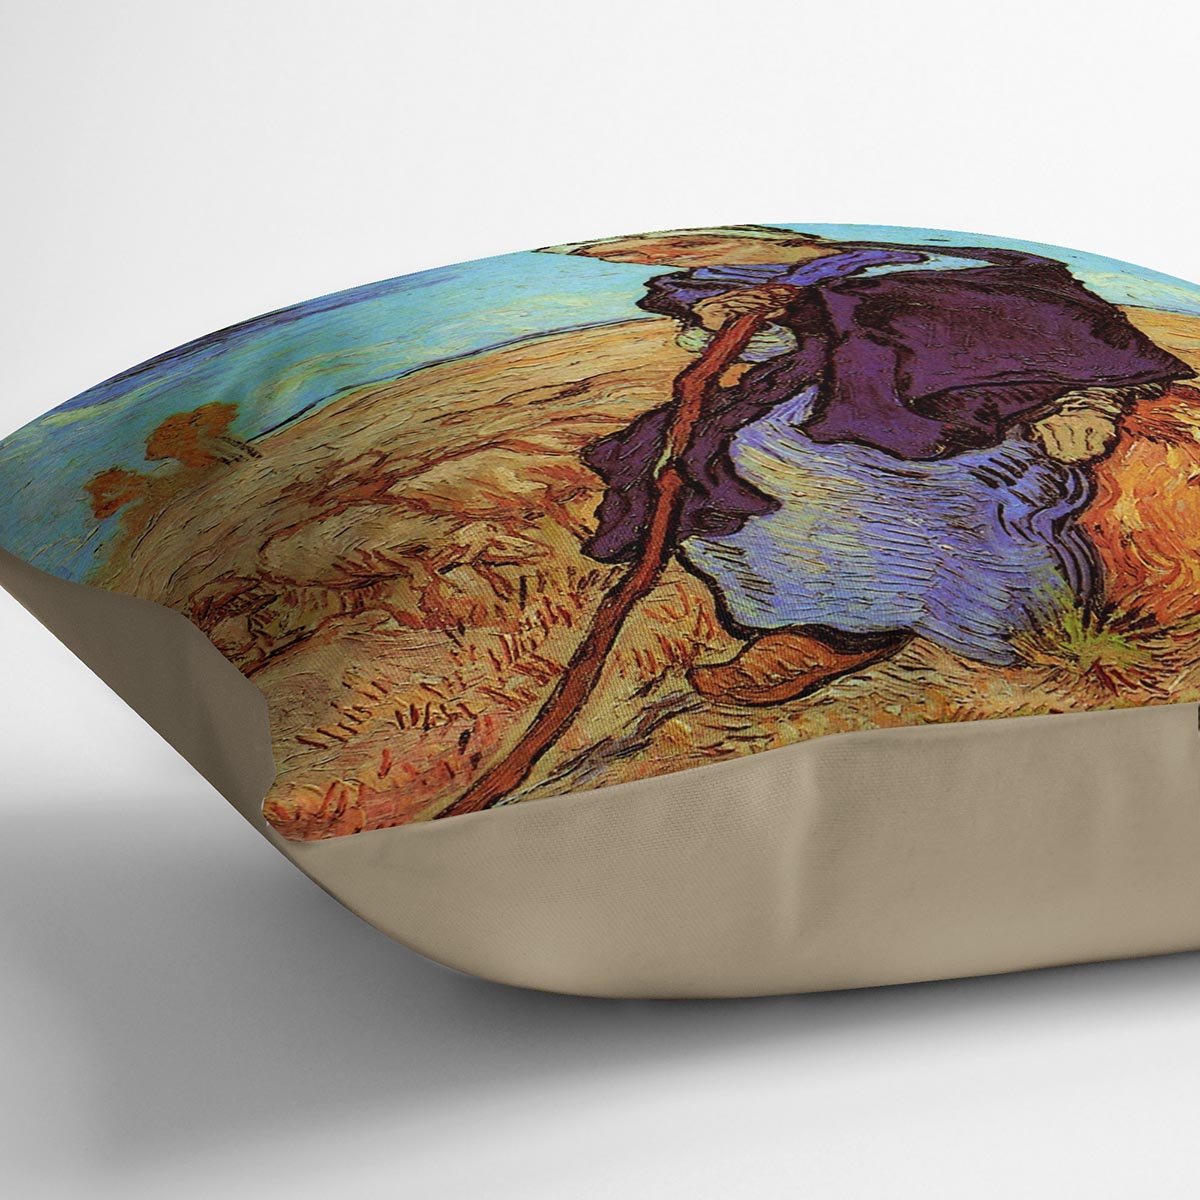 The Shepherdess after Millet by Van Gogh Throw Pillow